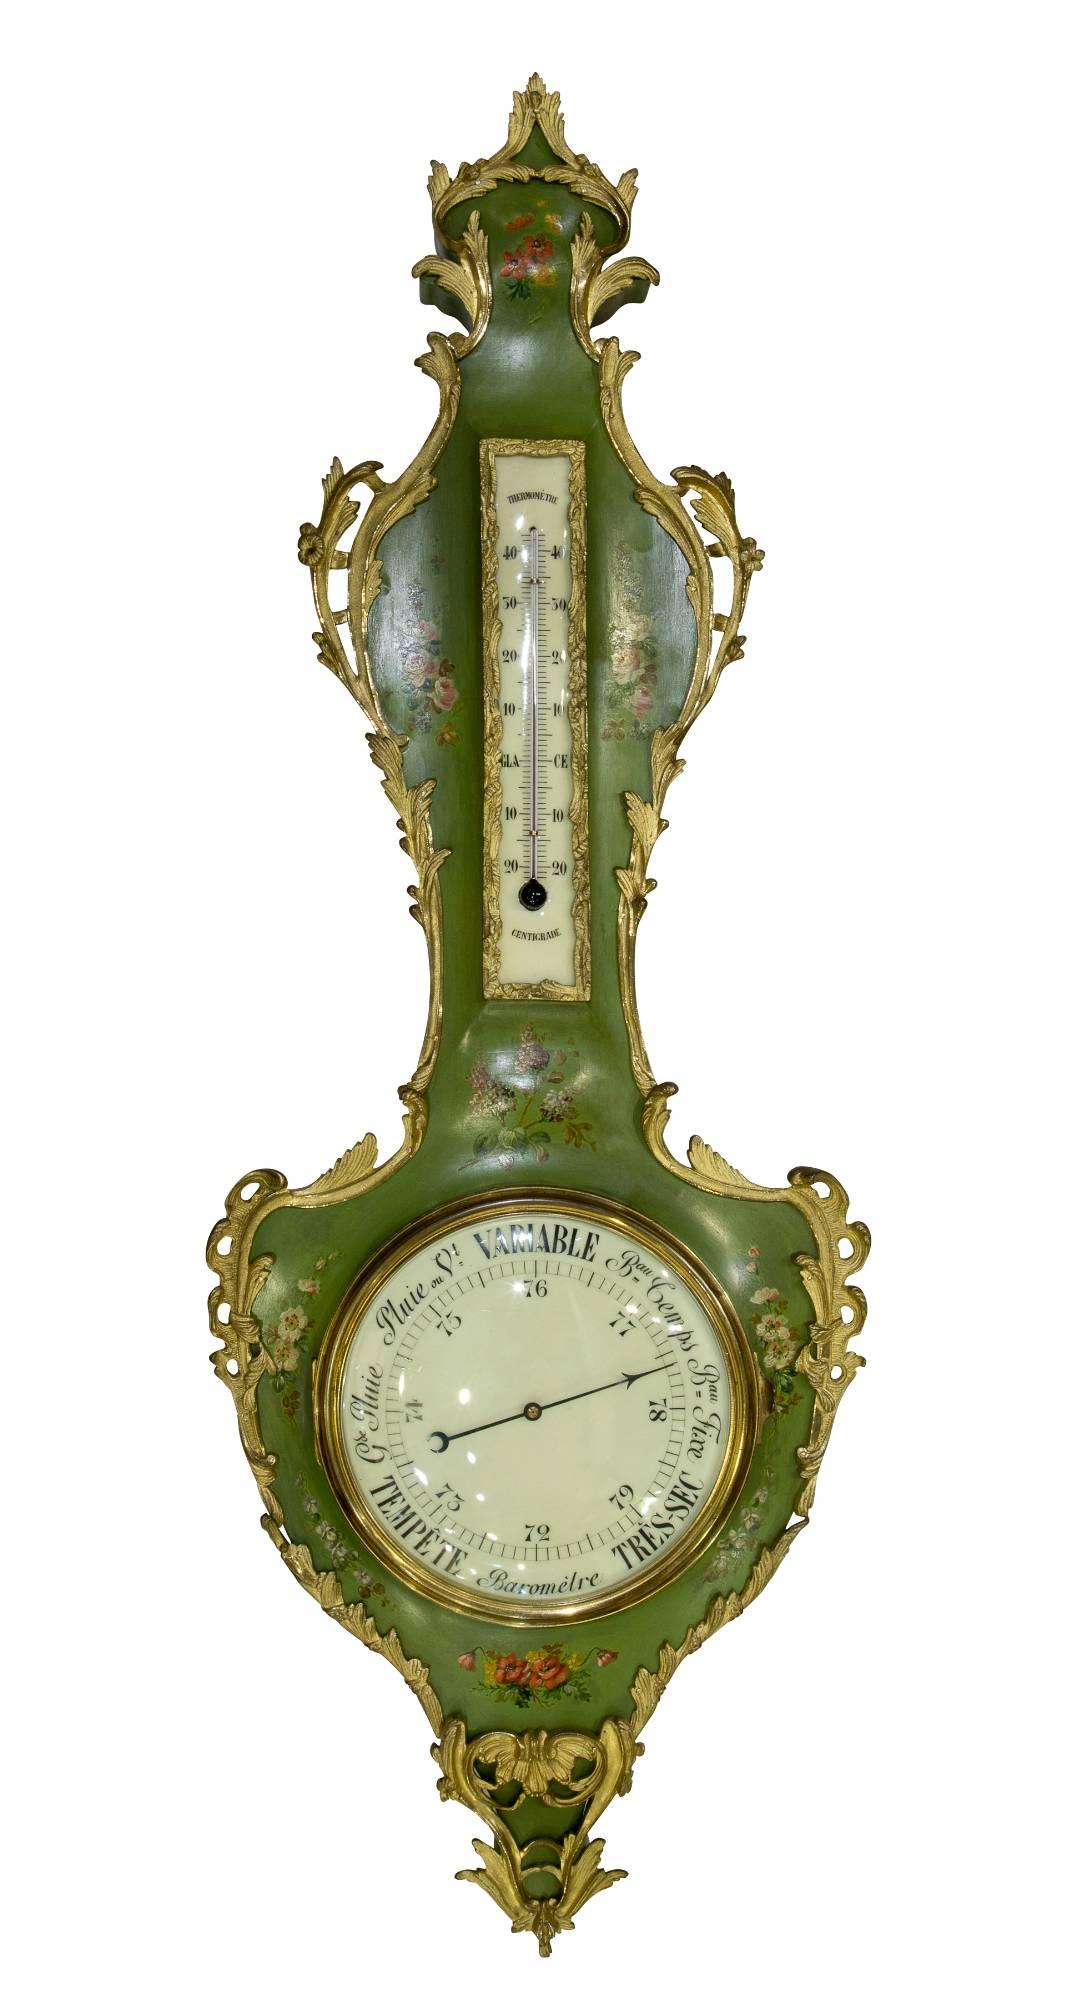 A fine and decorative Louis XV style French Vernis Martin Aneroid barometer and thermometer, decorated in green with floral detail and crisp ormolu mounts,

circa 1900.
          
    